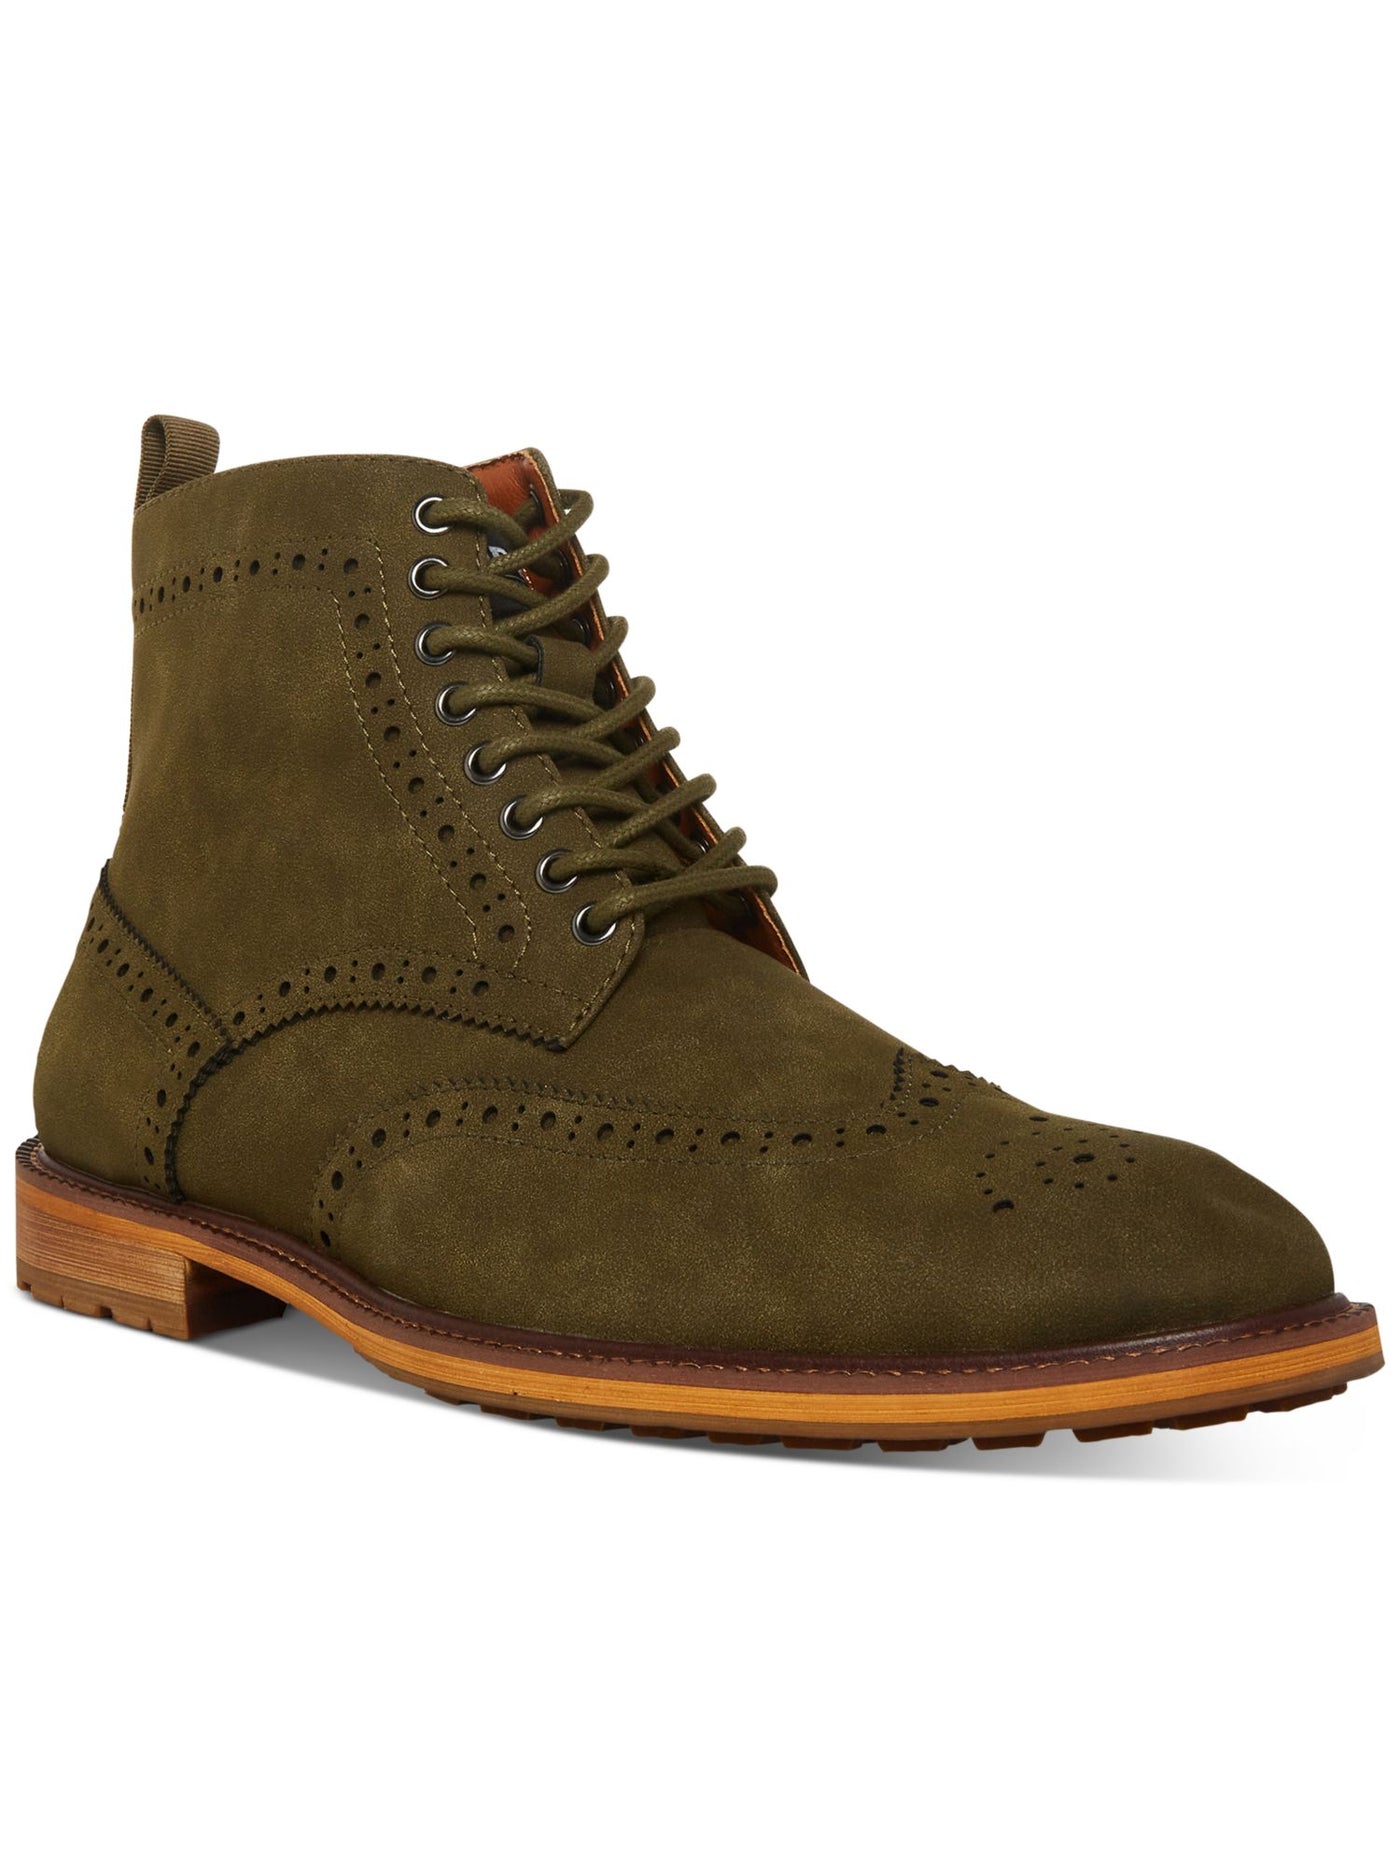 MADDEN Mens Olive Green Brogue Detailing Lace-Up Front Heel Pull-Tab Padded Remppr Wingtip Toe Block Heel Zip-Up Boots Shoes 13